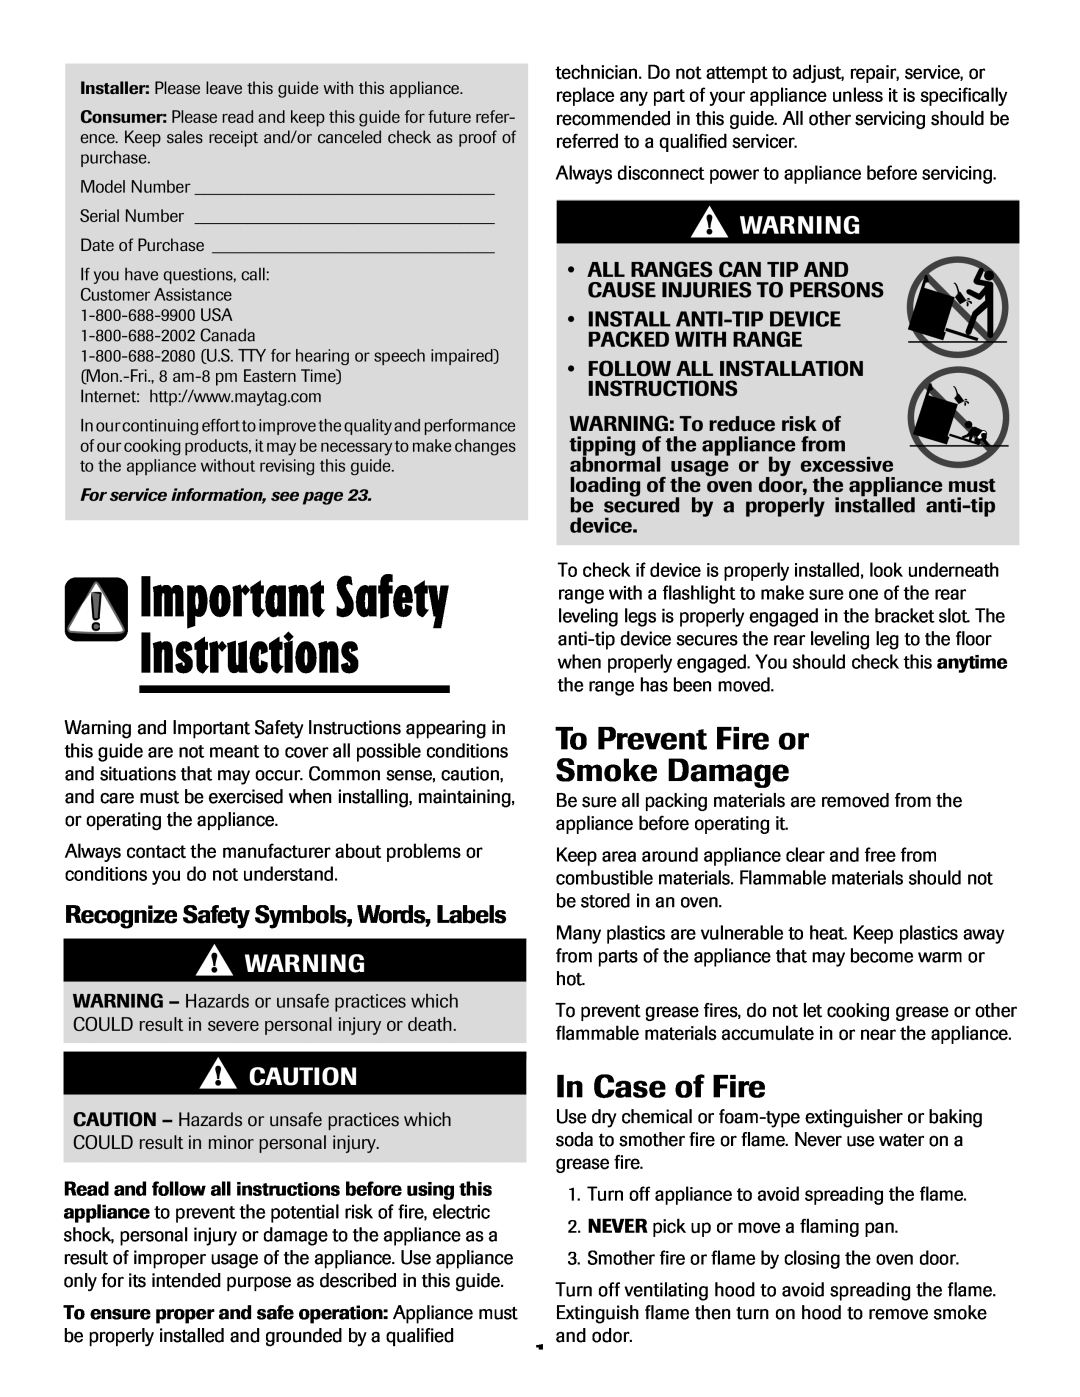 Maytag MES5752BAS, 8113P768-60 manual Instructions, Important Safety, To Prevent Fire or Smoke Damage, In Case of Fire 